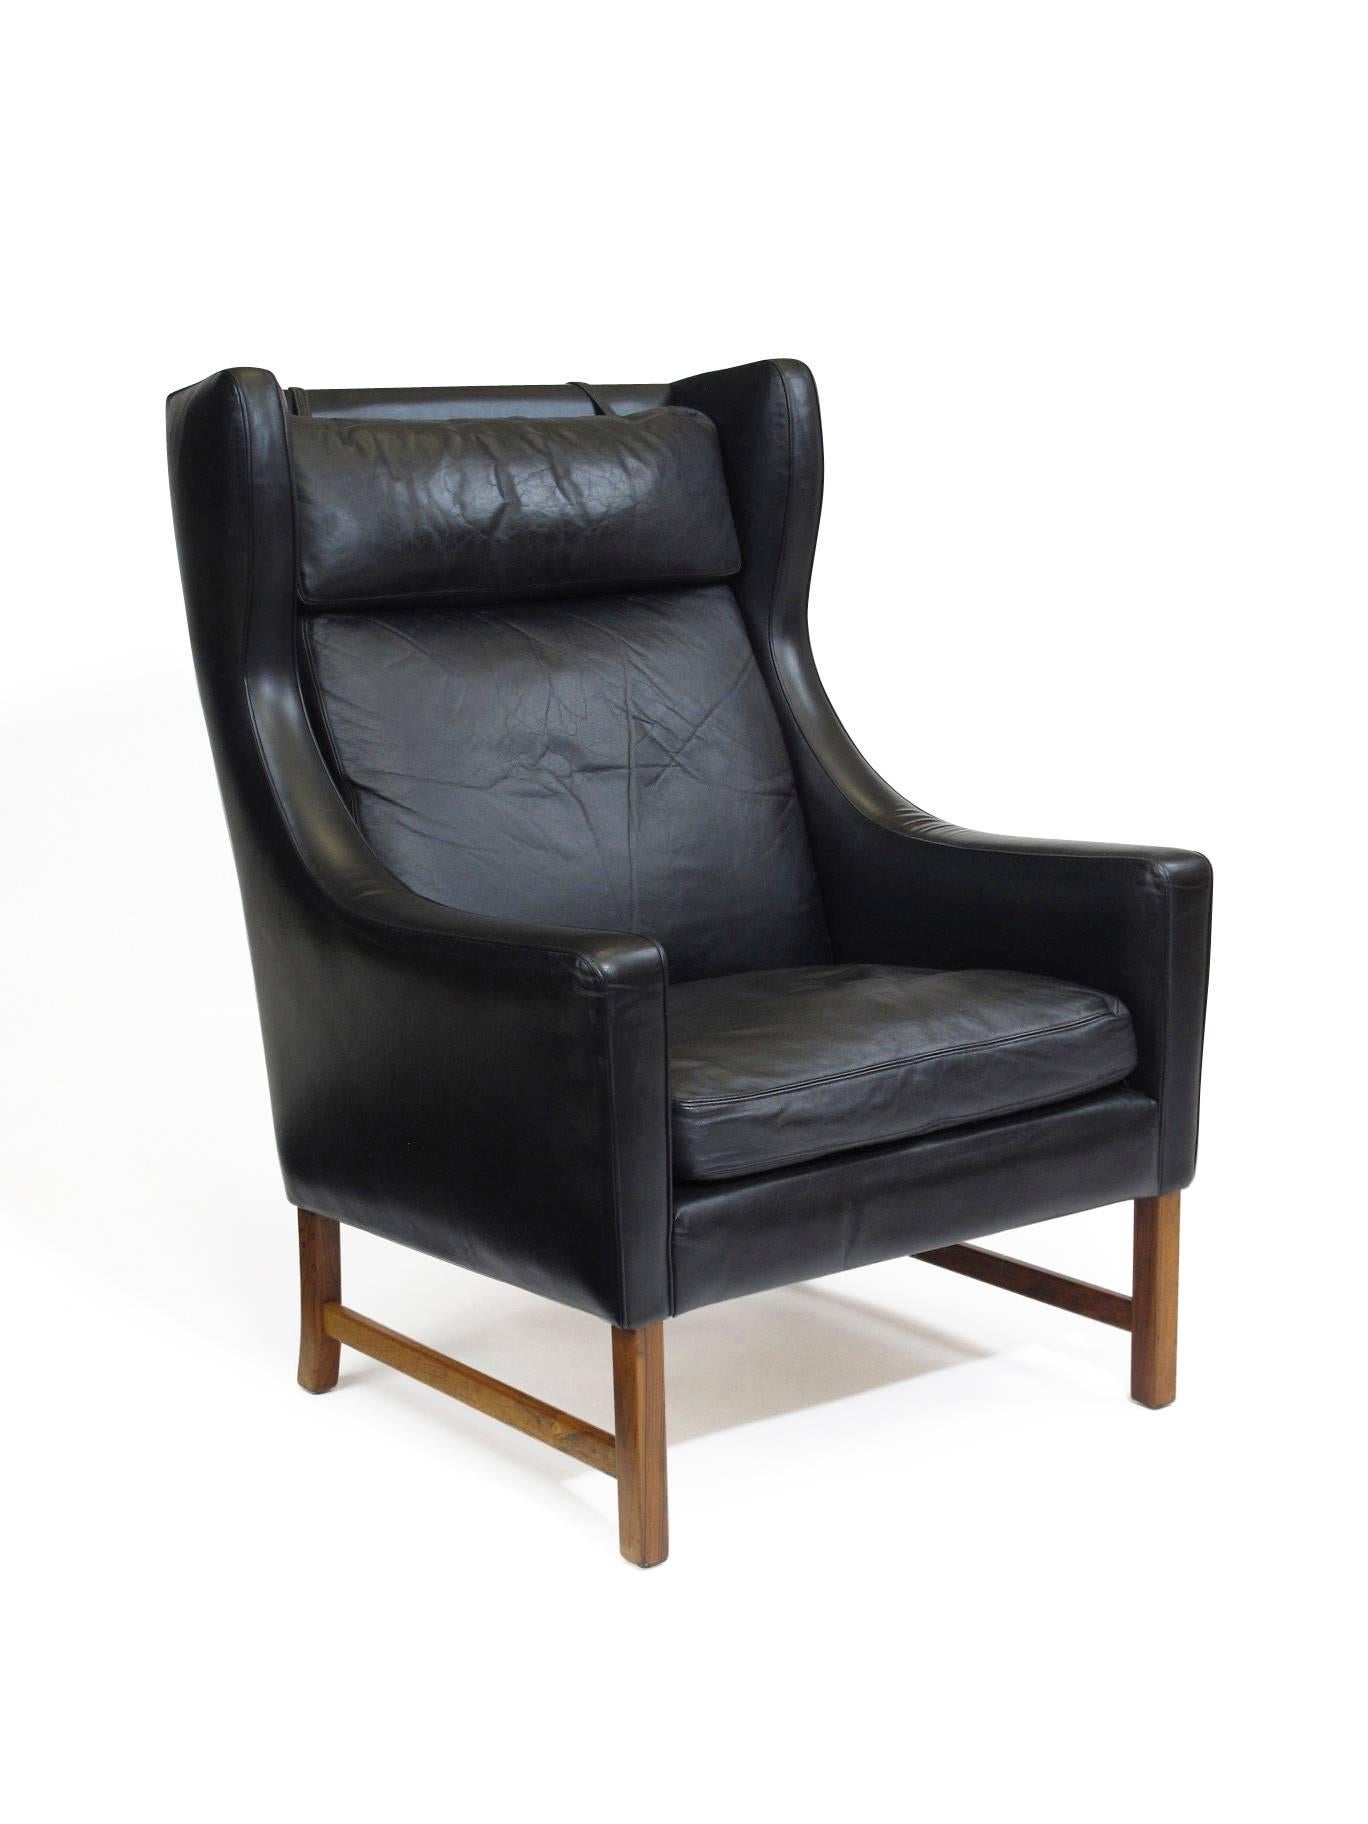 20th Century Fredrik Kayser Rosewood and Black Leather High-Back Danish Lounge Chair